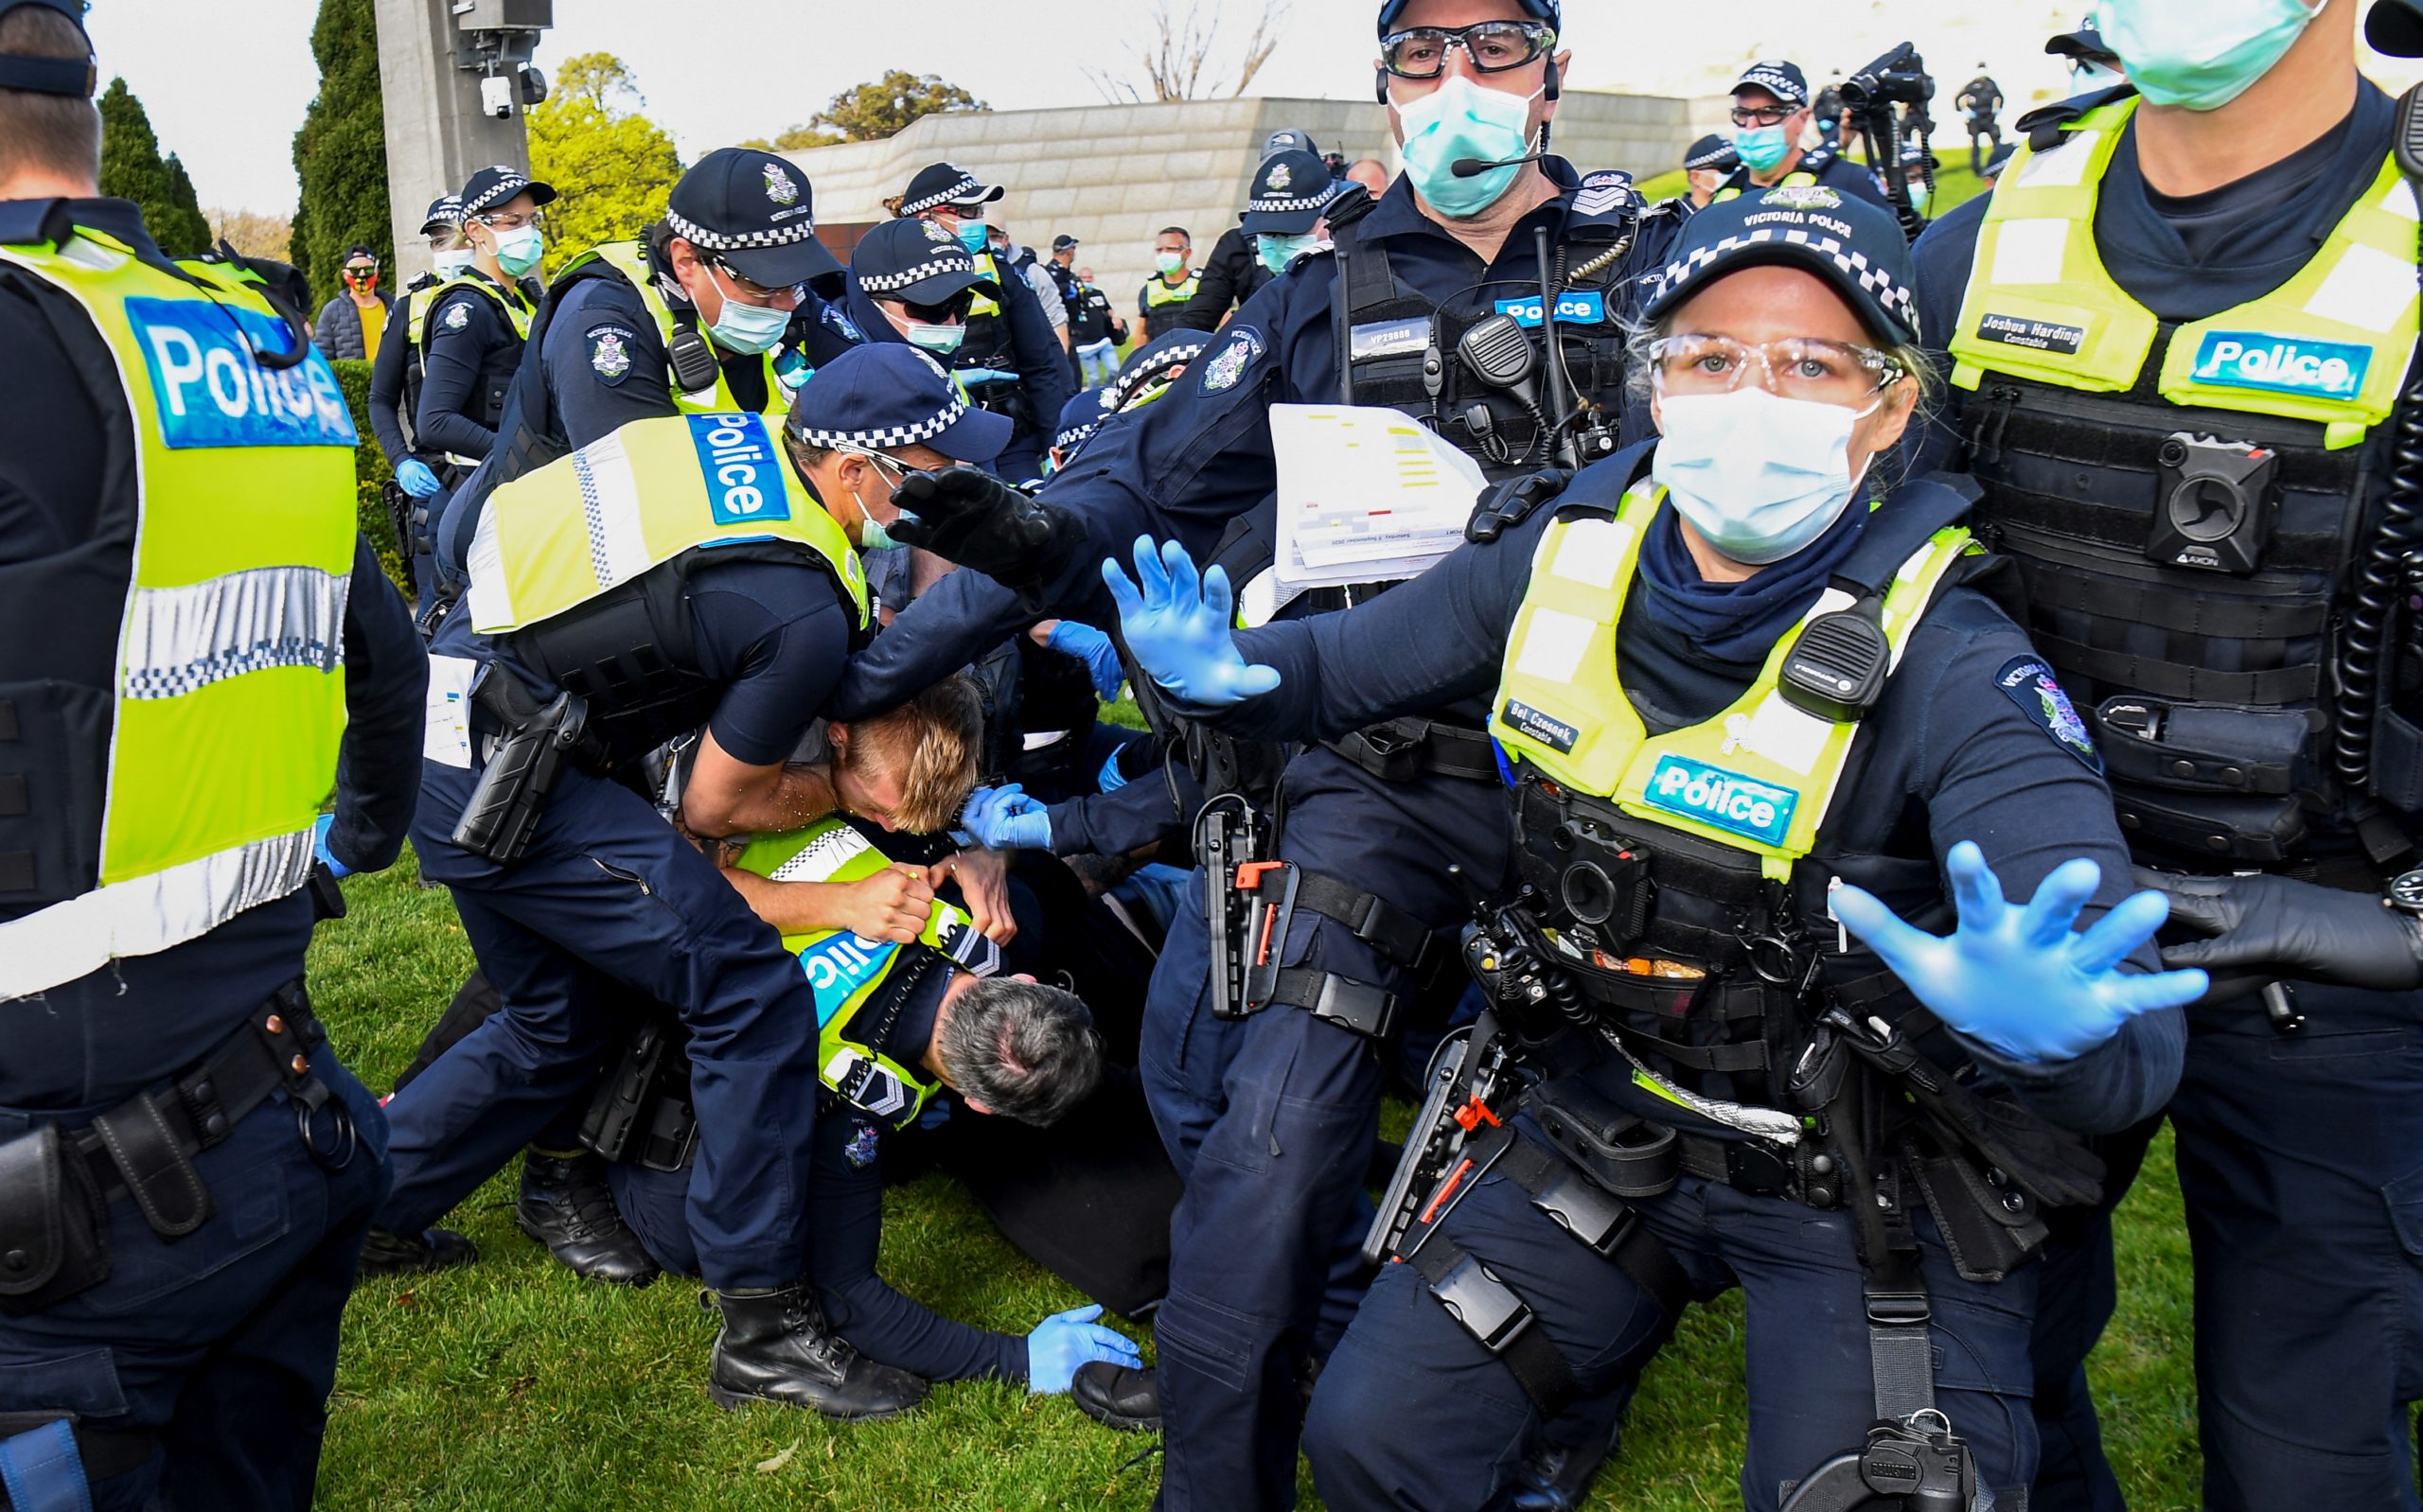 TOPSHOT - Police tackle protesters in Melbourne on September 5, 2020 during an anti-lockdown rally protesting the state's strict lockdown laws as a preventive measure against the COVID-19 coronavirus. (Photo by William WEST / AFP) (Photo by WILLIAM WEST/AFP via Getty Images)